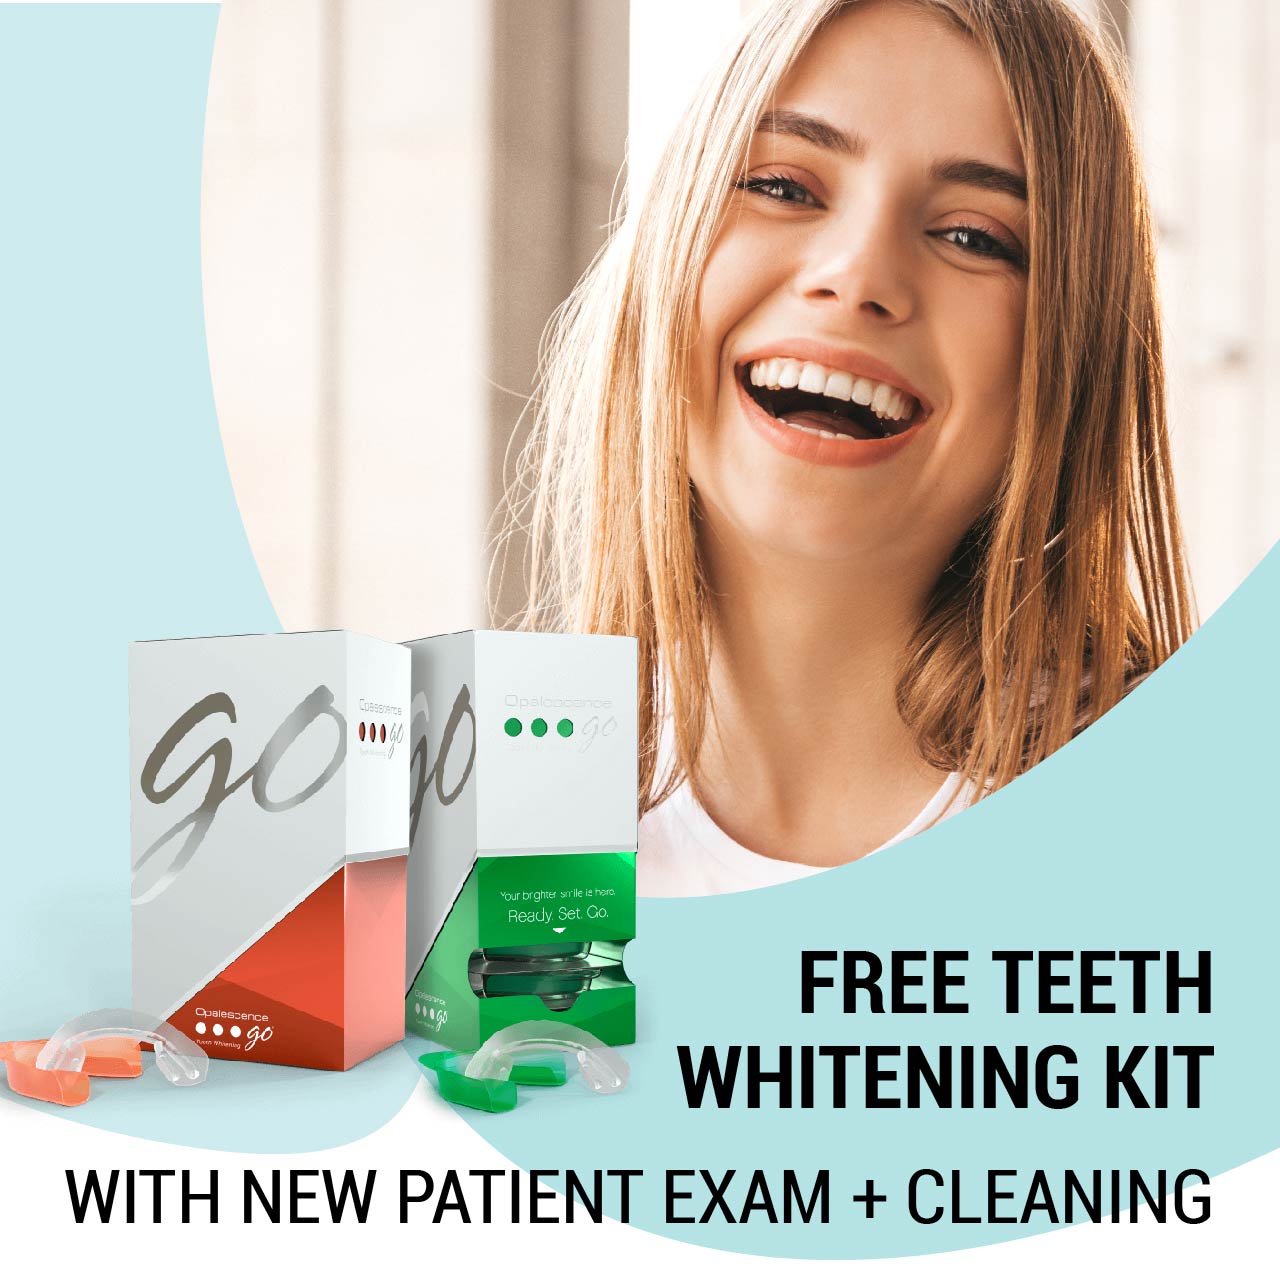 free teeth whitening offer for new patients